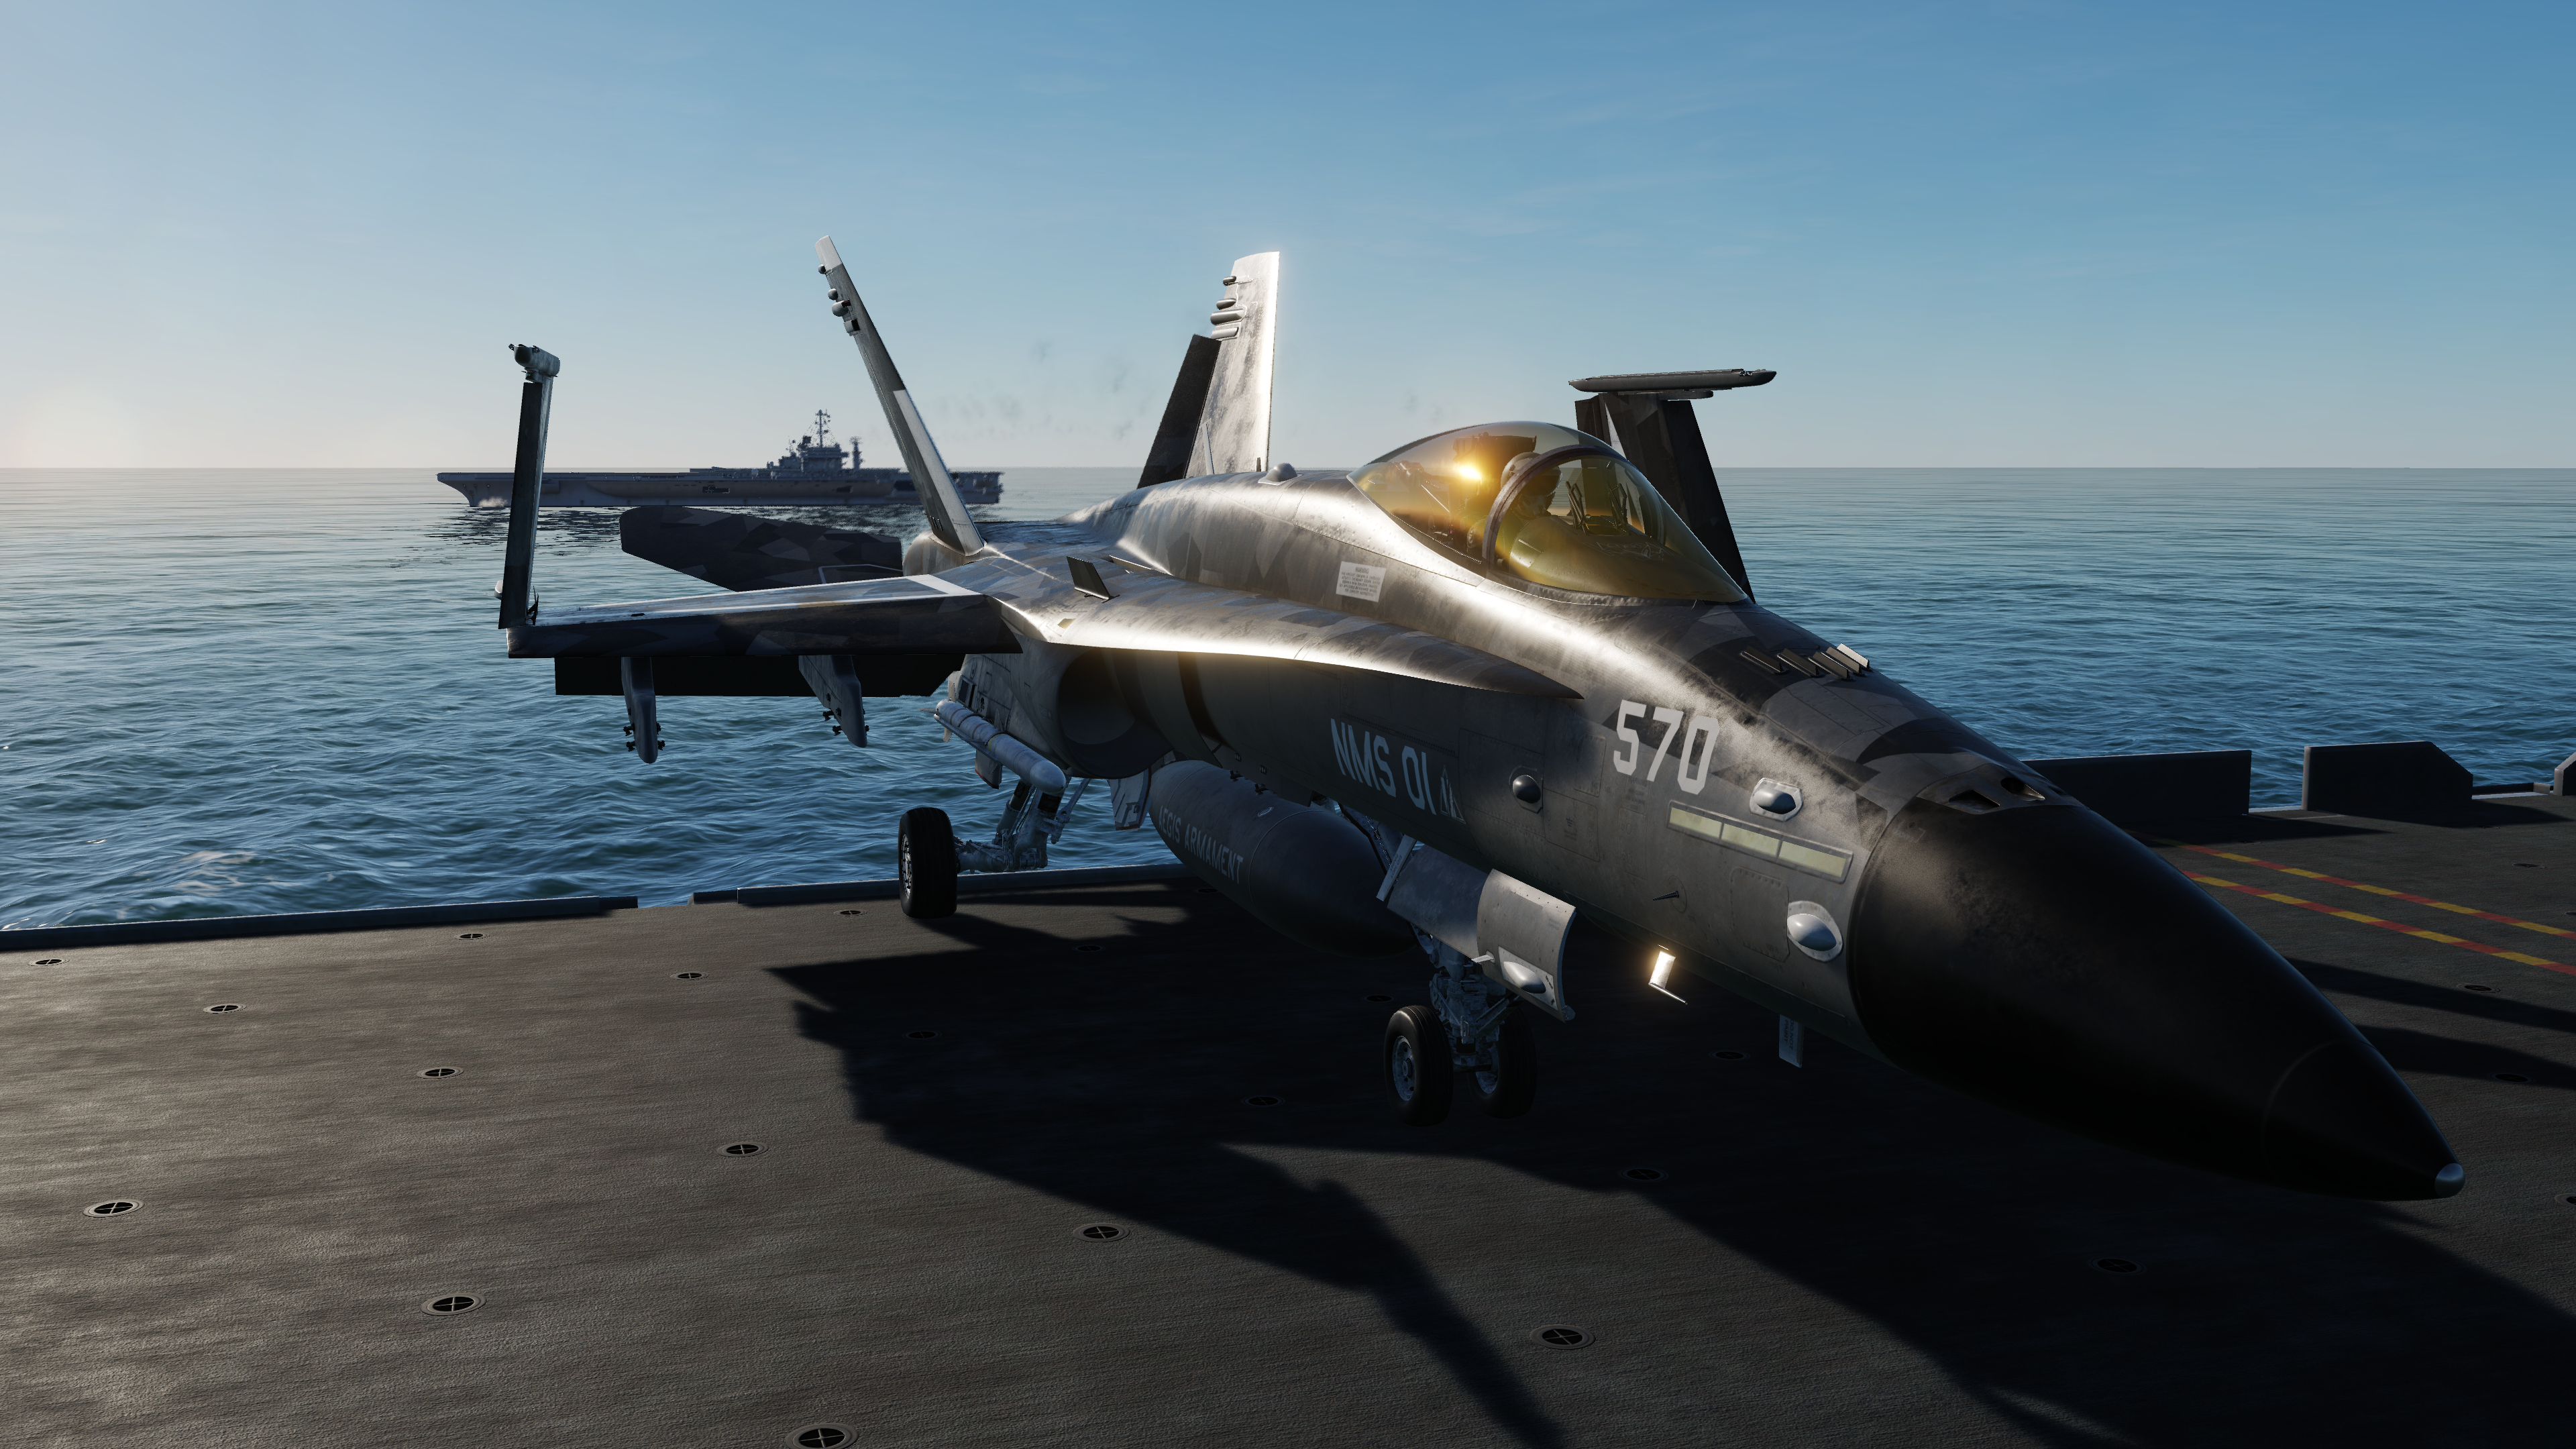 General 3840x2160 Digital Combat Simulator military aircraft aircraft military numbers McDonnell Douglas F/A-18 Hornet military vehicle screen shot American aircraft vehicle video games frontal view water McDonnell Douglas video game art CGI